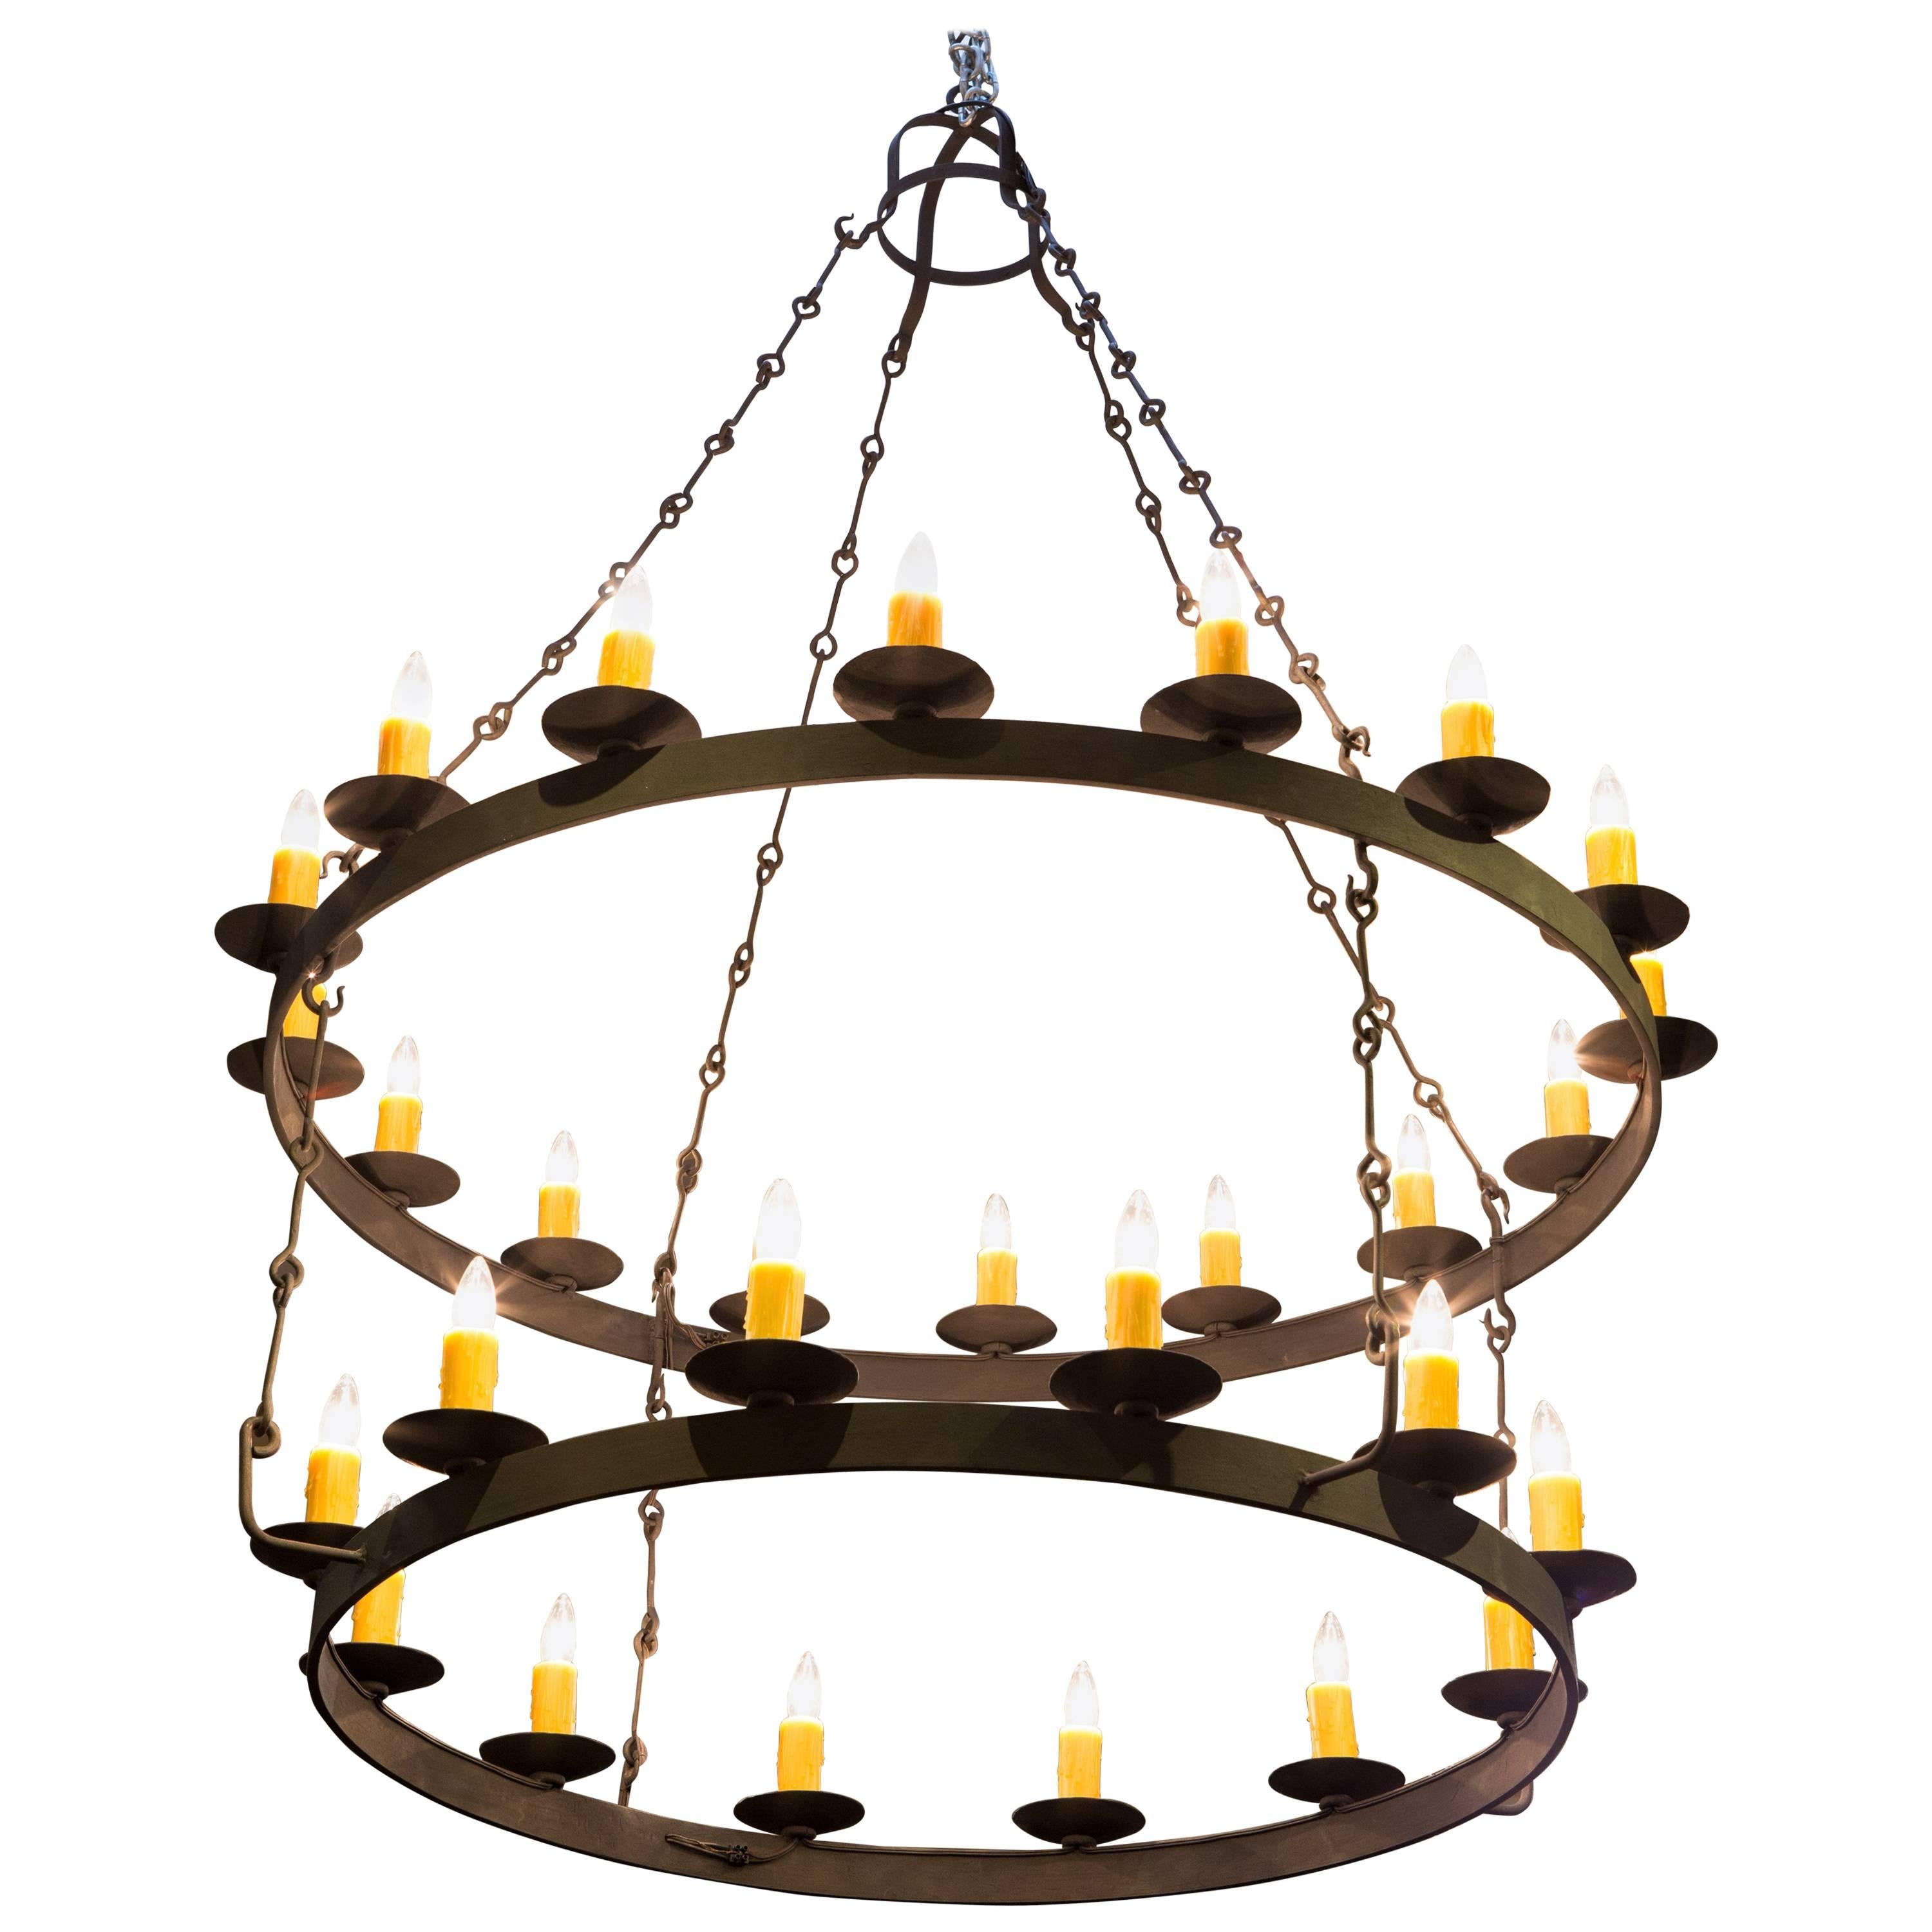 Massive Hand-Forged Iron Double Ring "Monroe" Chandelier with 28 Sockets